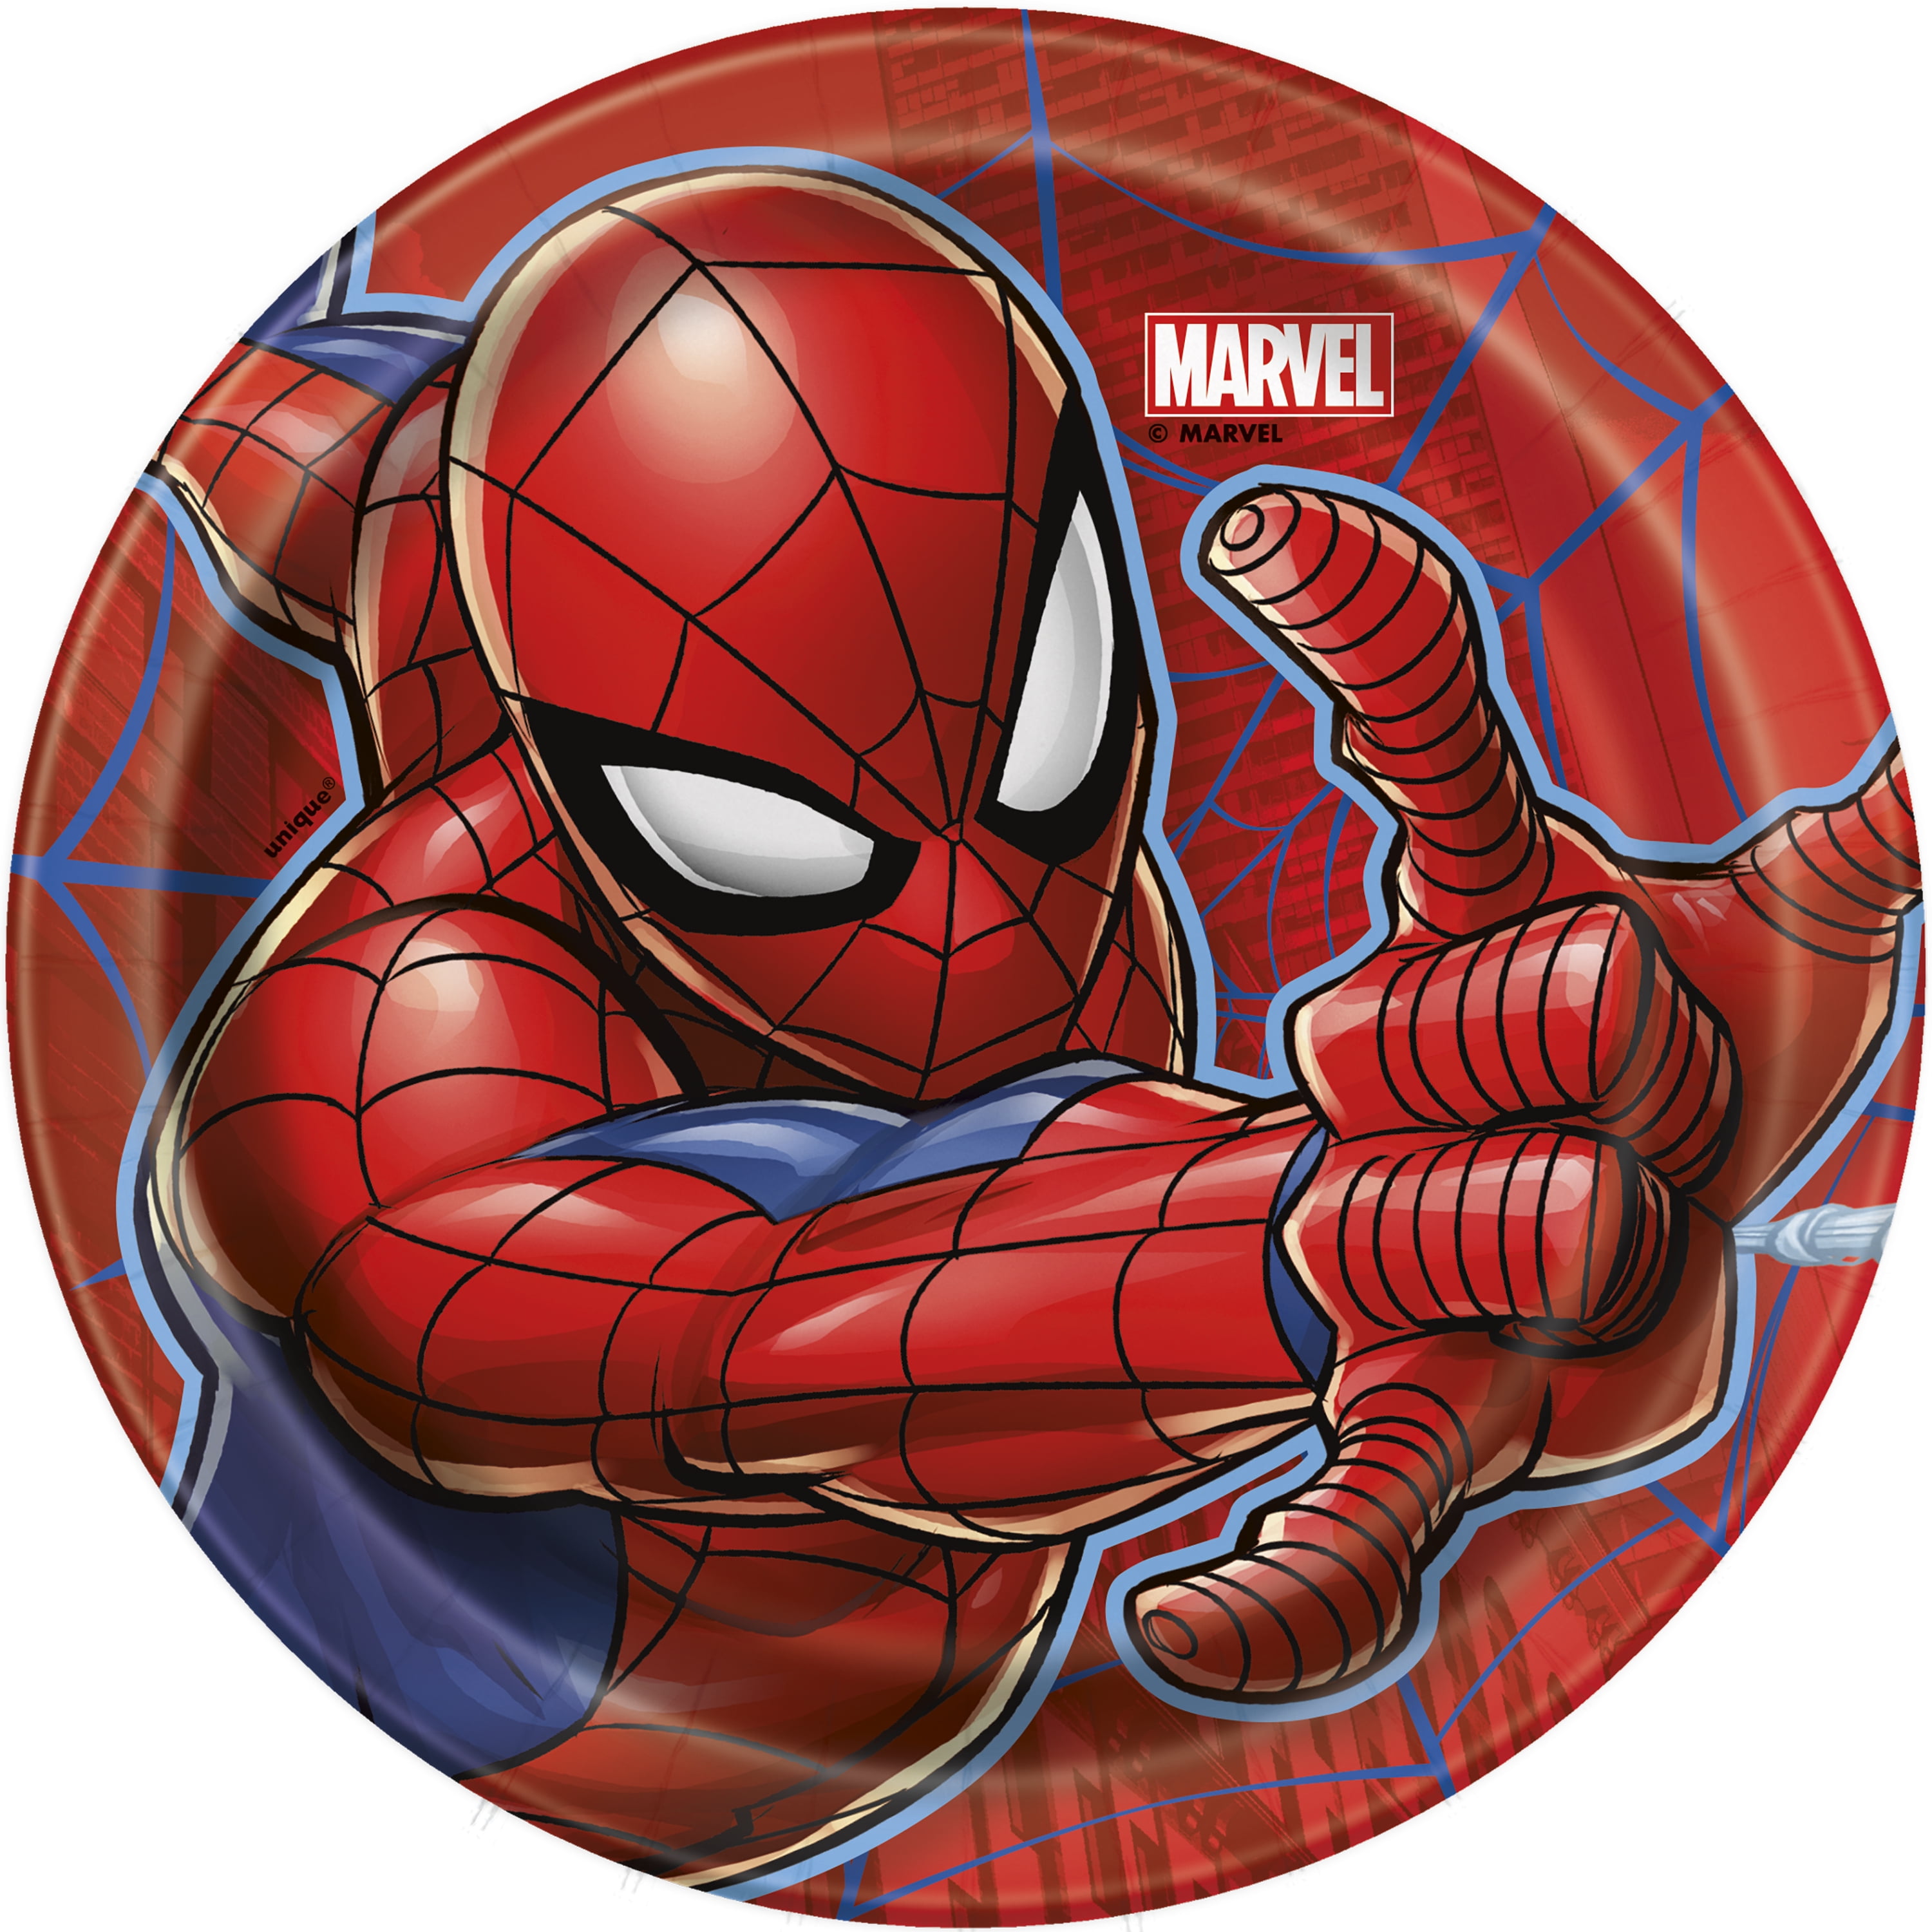 Deluxe Spiderman Team Up Plates Cups Napkins Tablecover PARTY KITS 8-40 